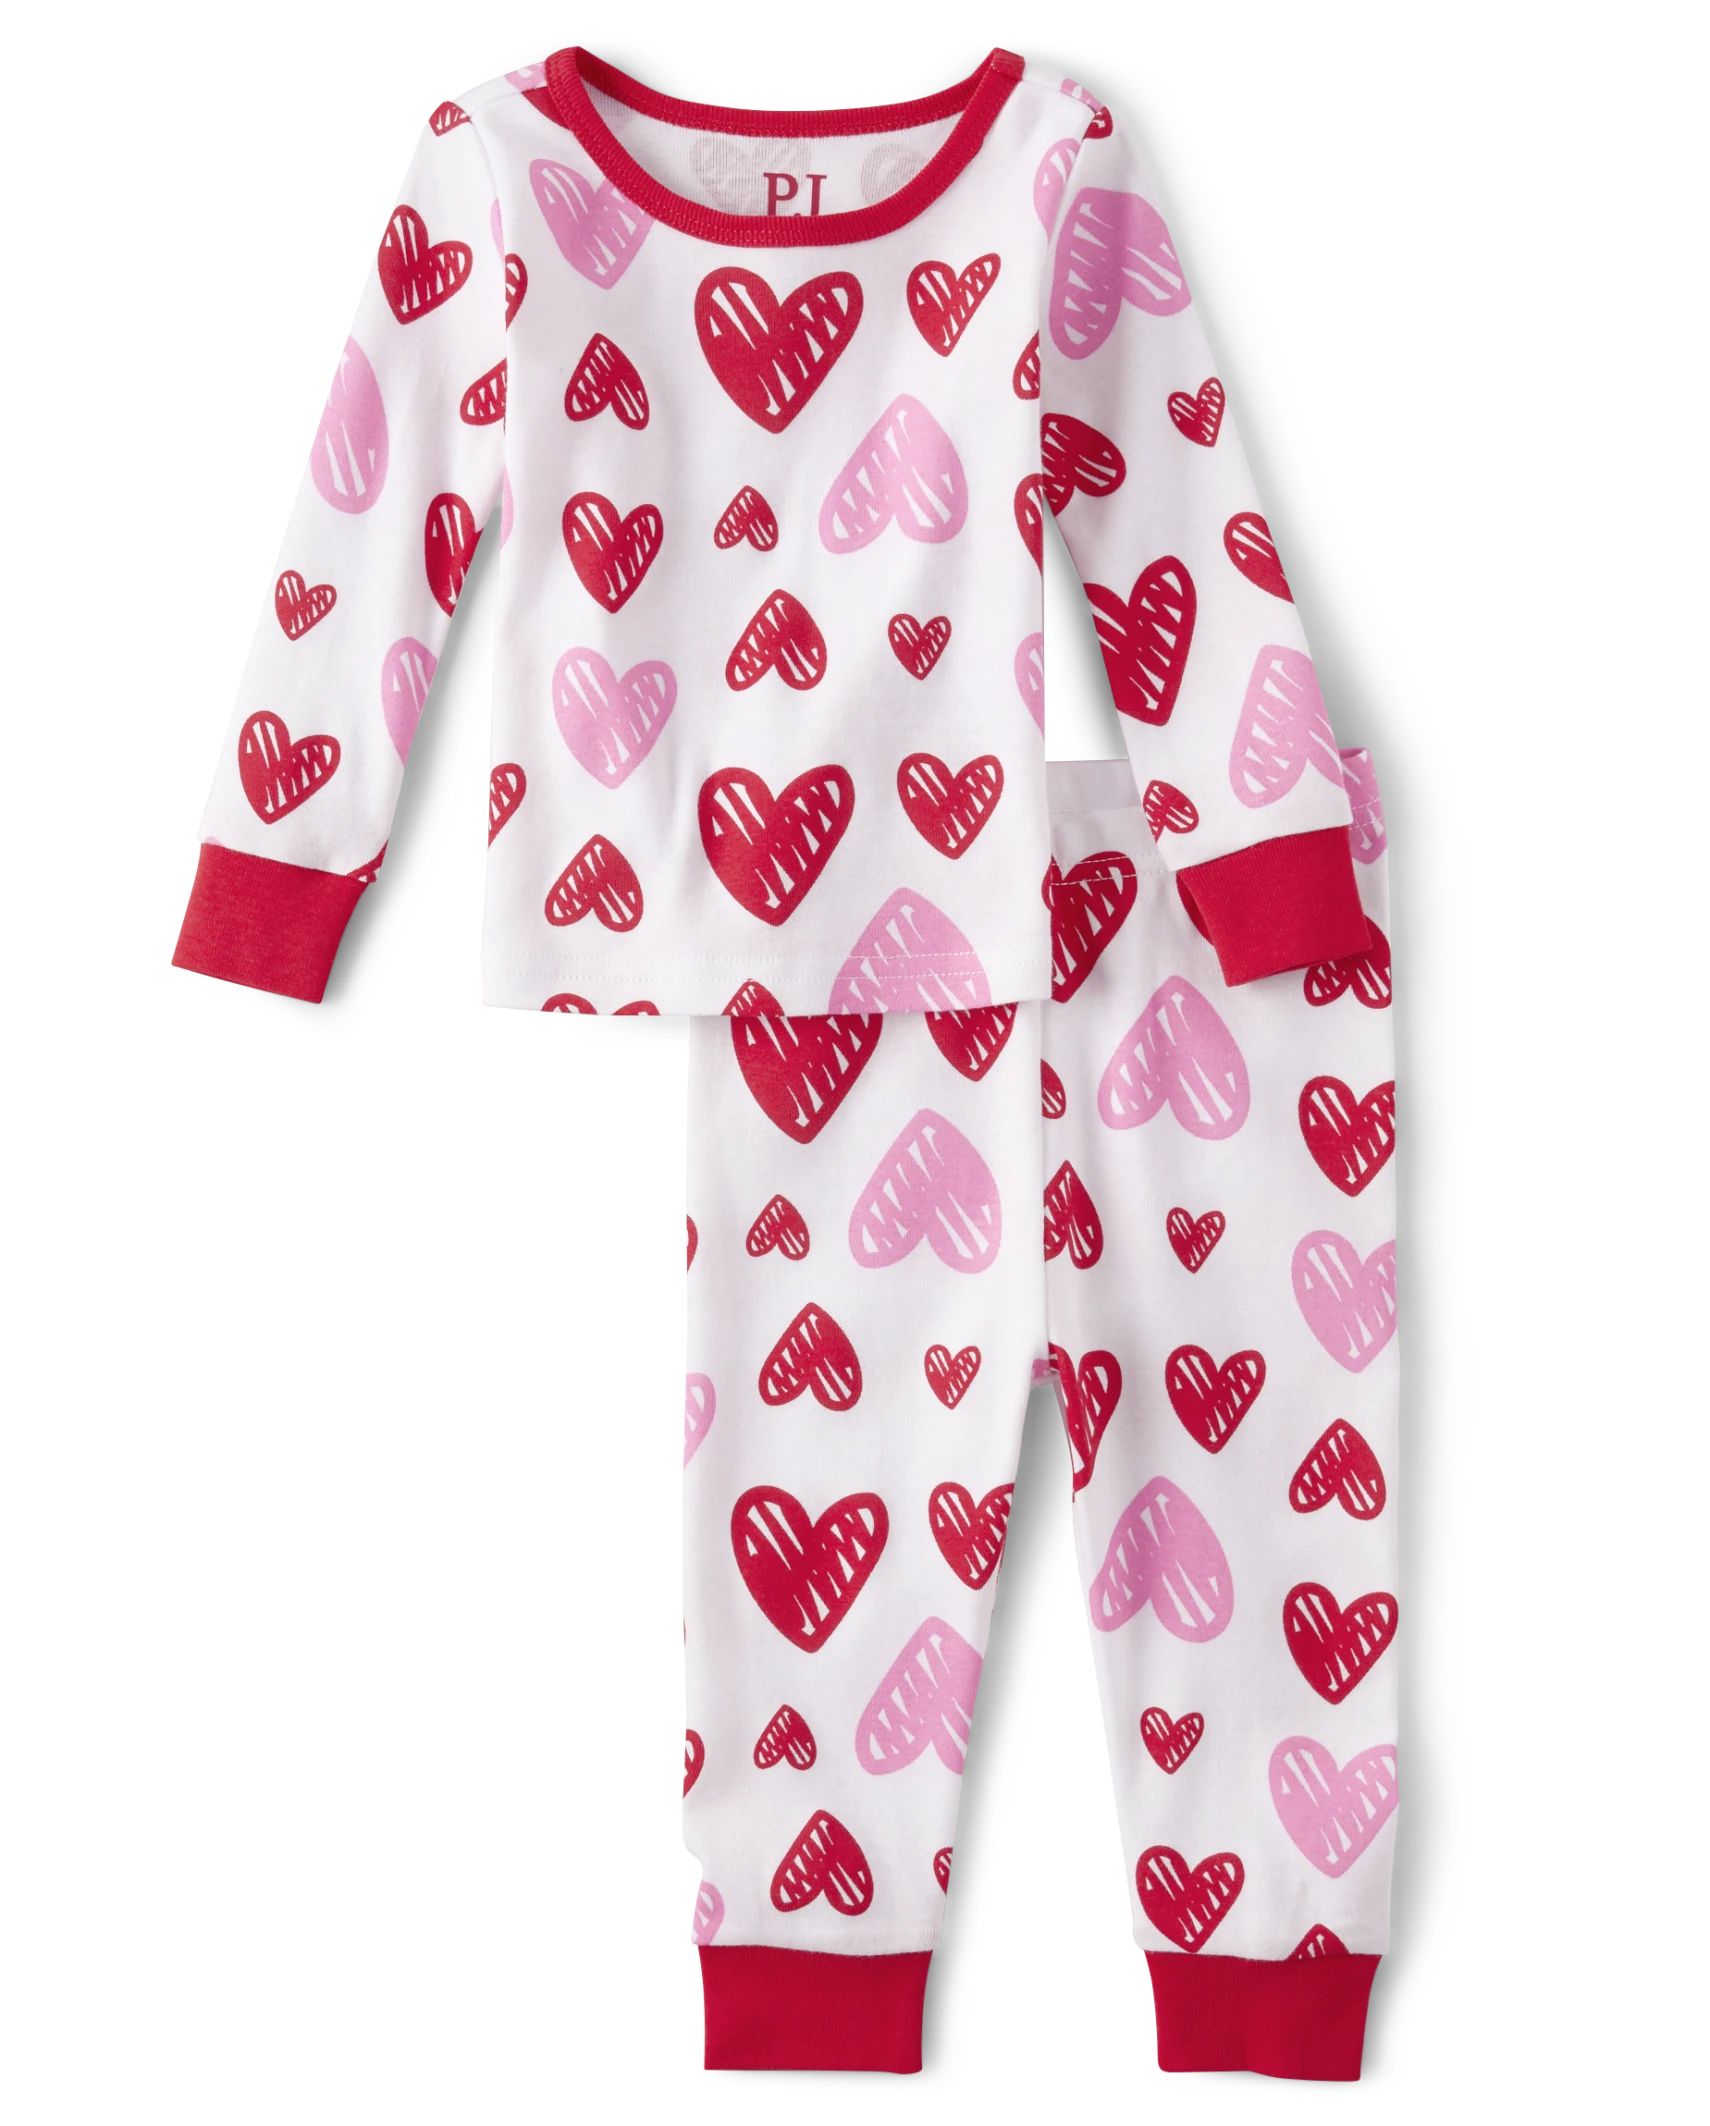 Baby And Toddler Girls Heart Snug Fit Cotton Pajamas - white | The Children's Place